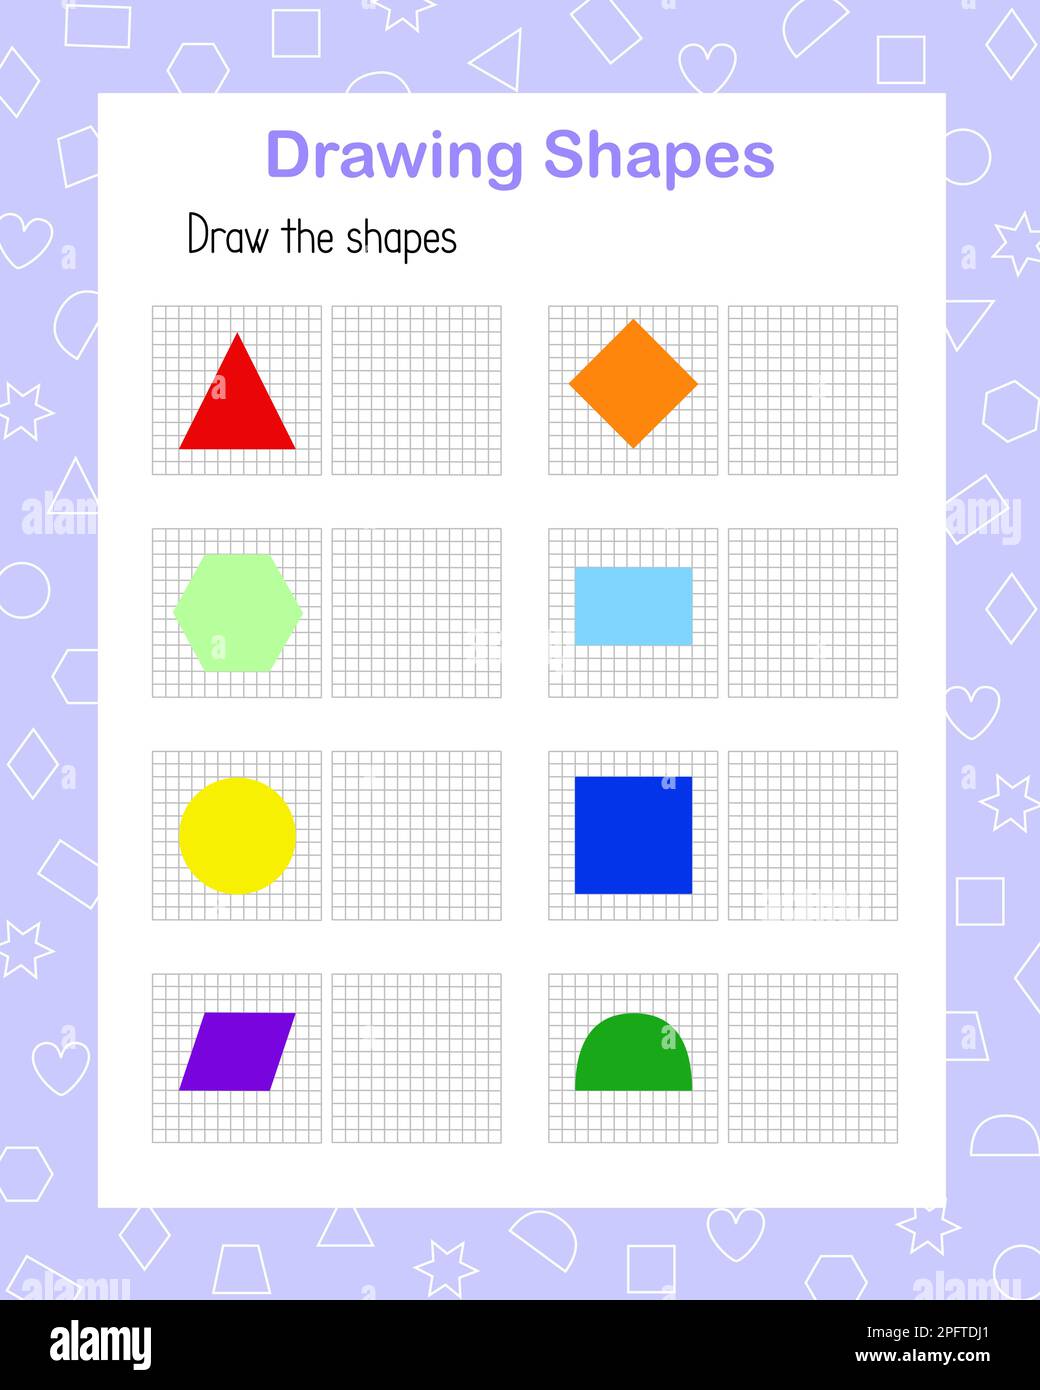 Making Animal Drawings Out of Shapes Worksheet | Shapes worksheets, Animal  drawings, Drawings